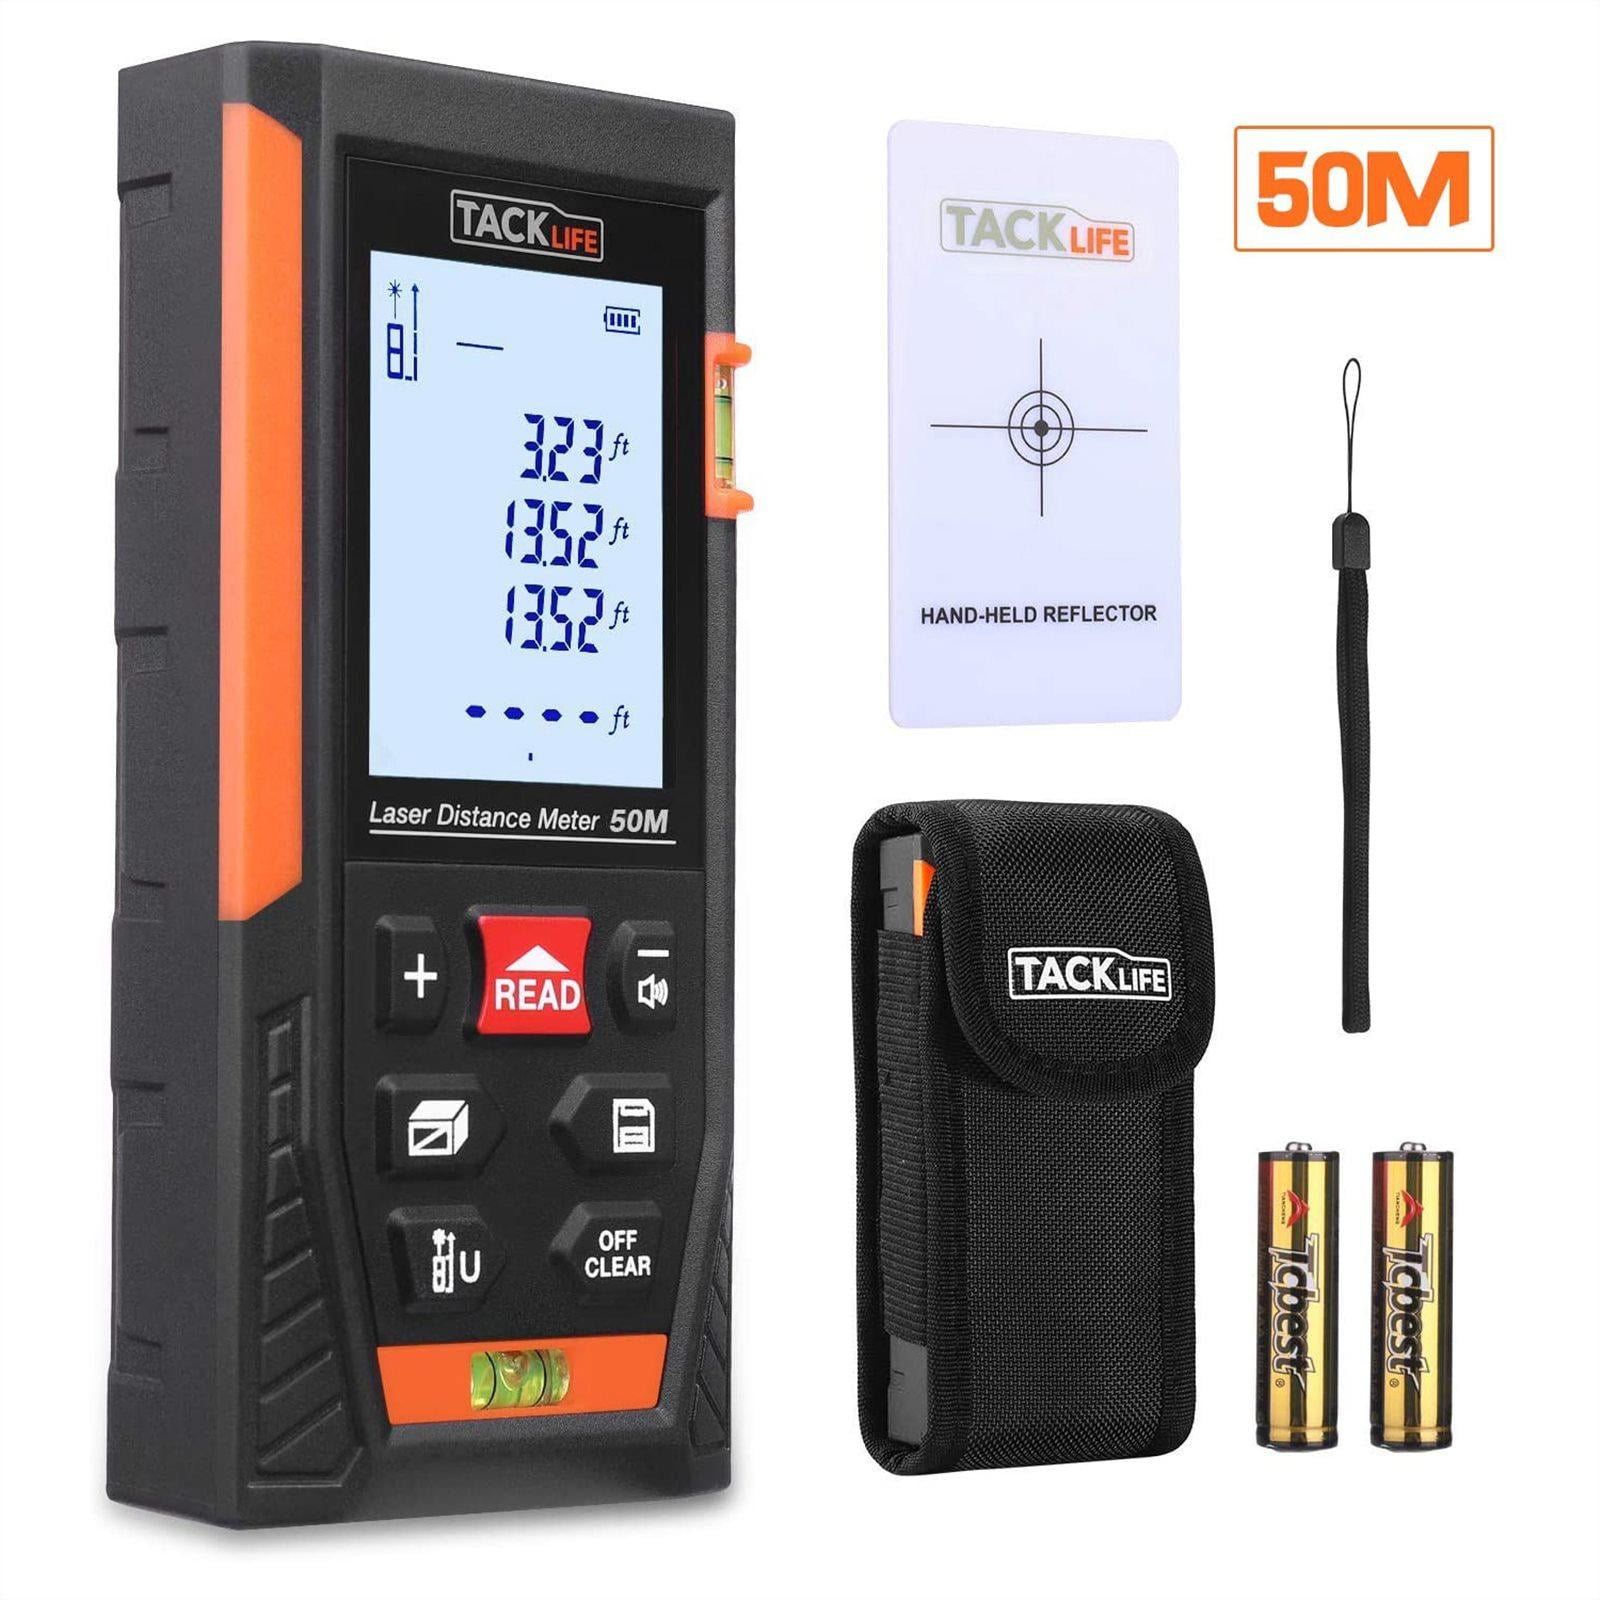 PREXISO Mini Laser Measure Volume Modes Distance and Pythagorean Area 135Ft Rechargeable Laser Distance Meter with High Accuracy Multi-Measurement Units M/In/Ft